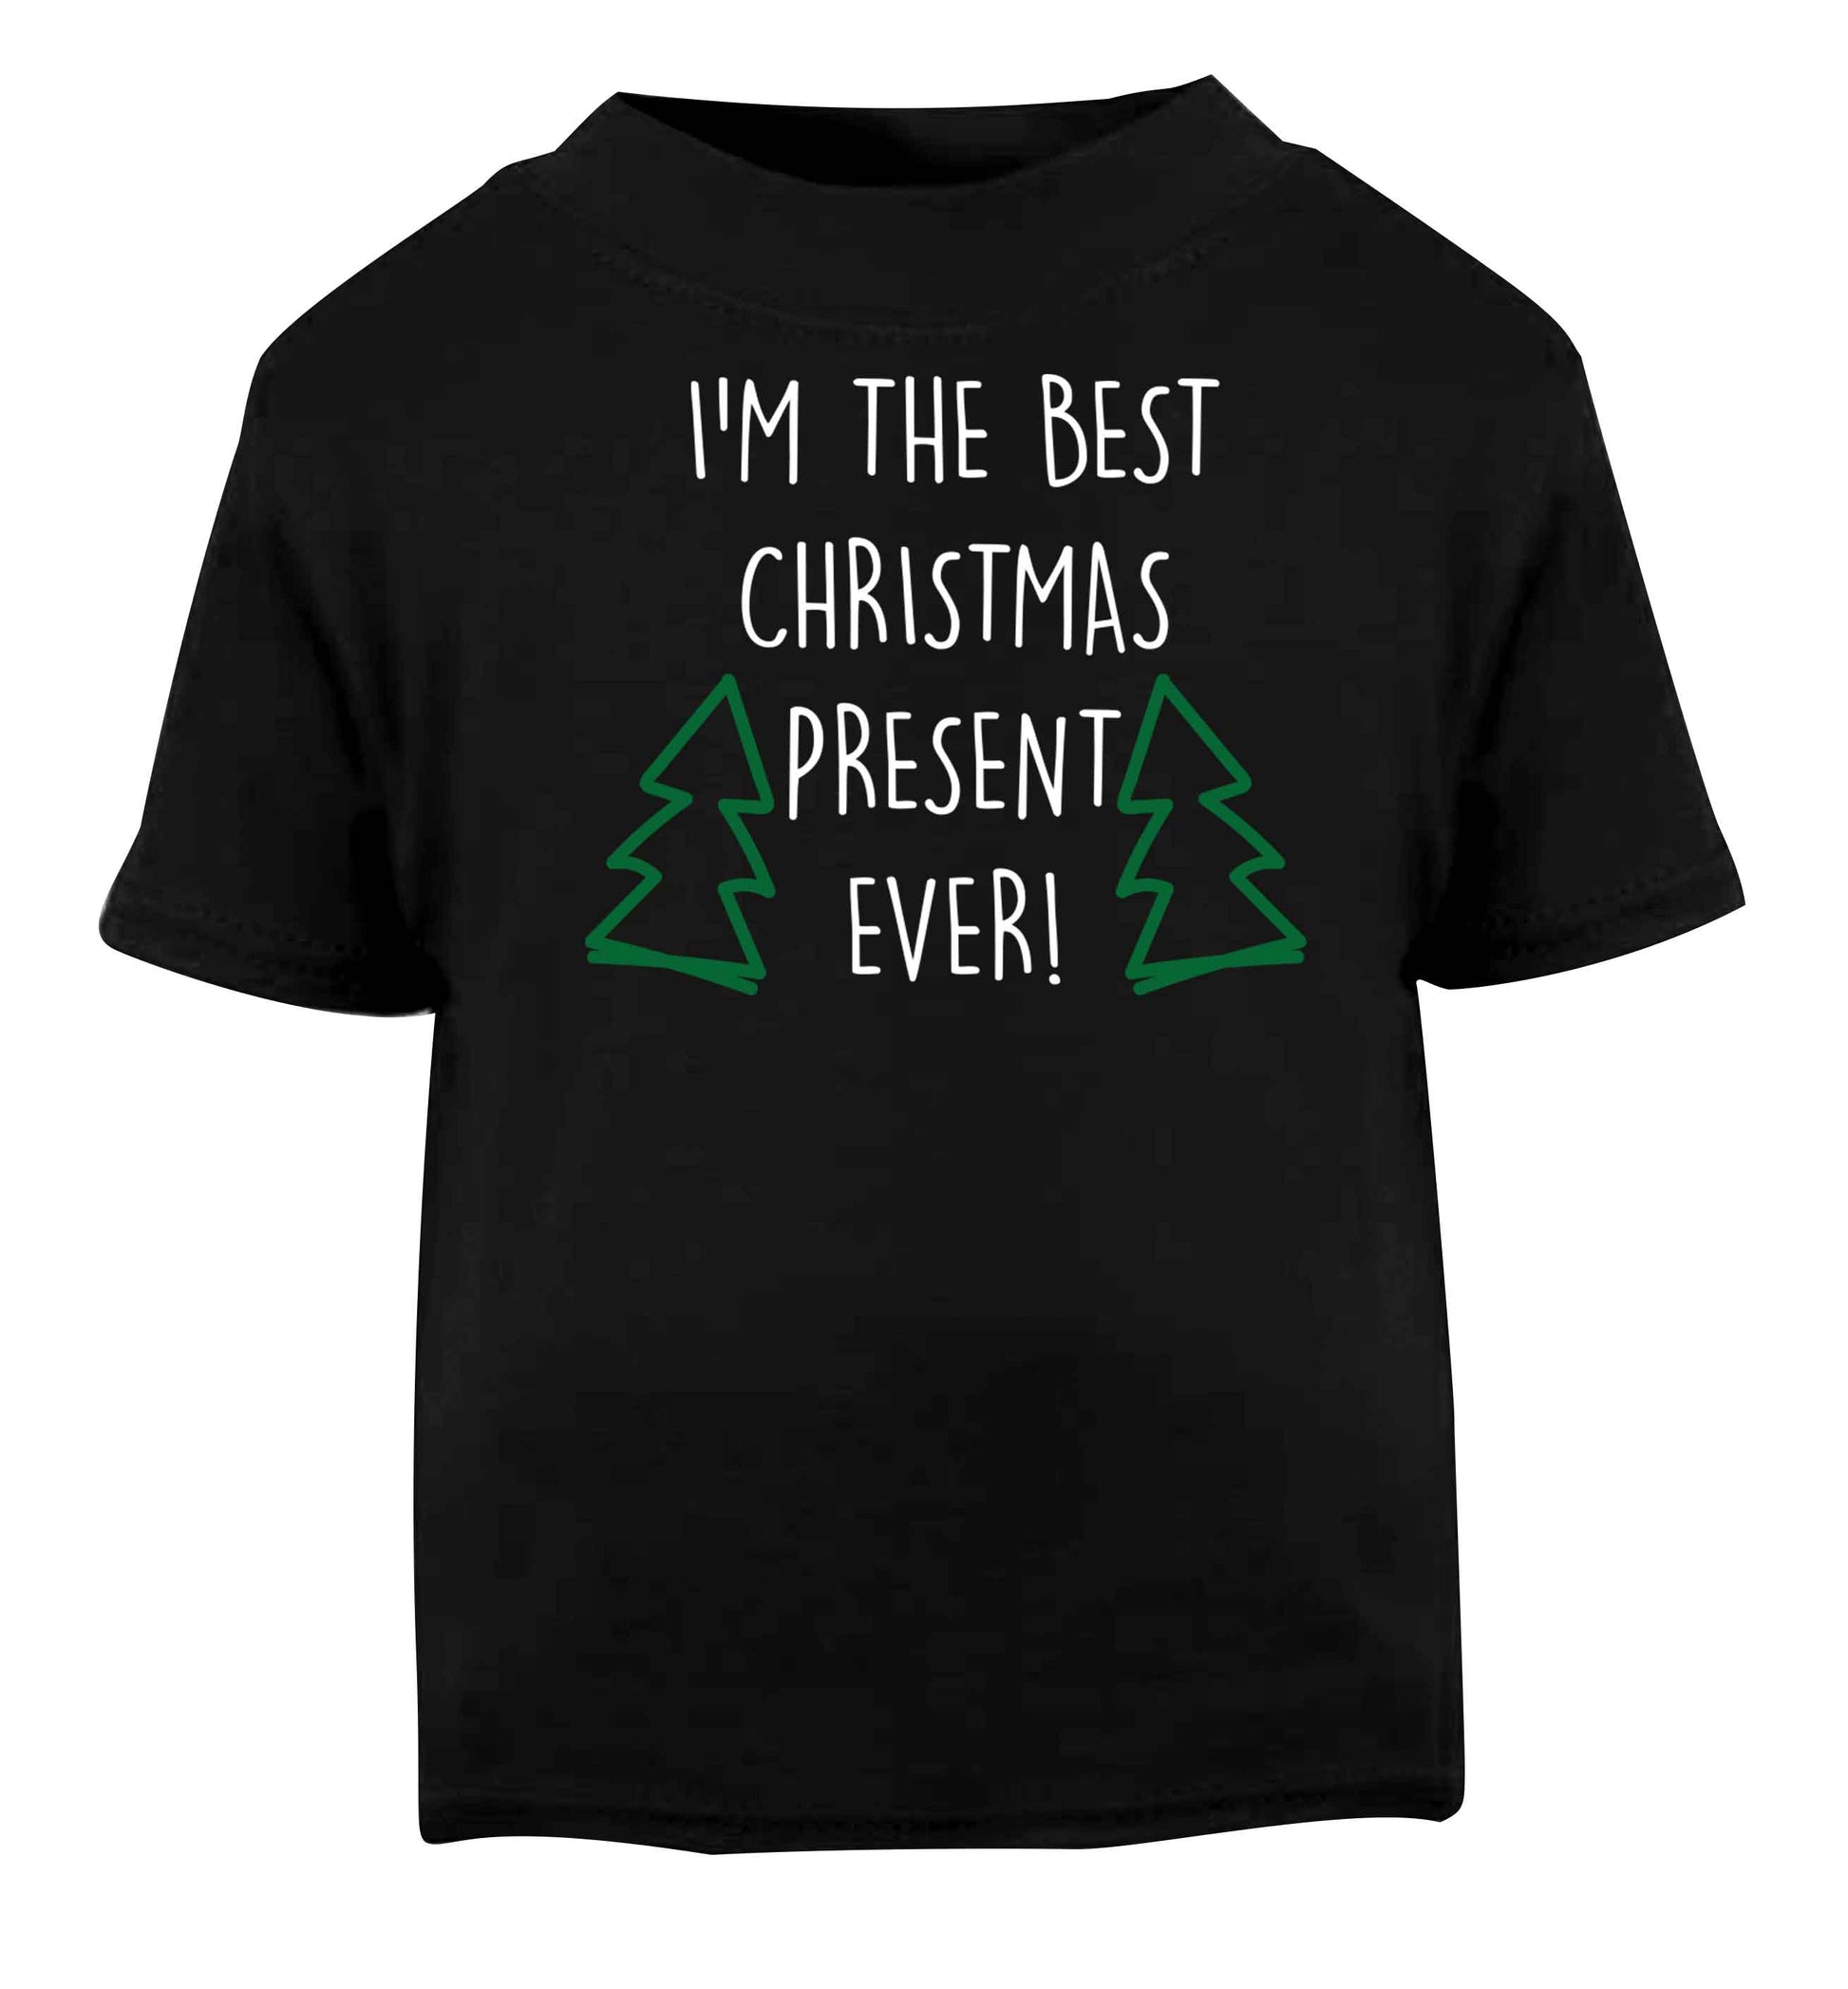 I'm the best Christmas present ever Black baby toddler Tshirt 2 years